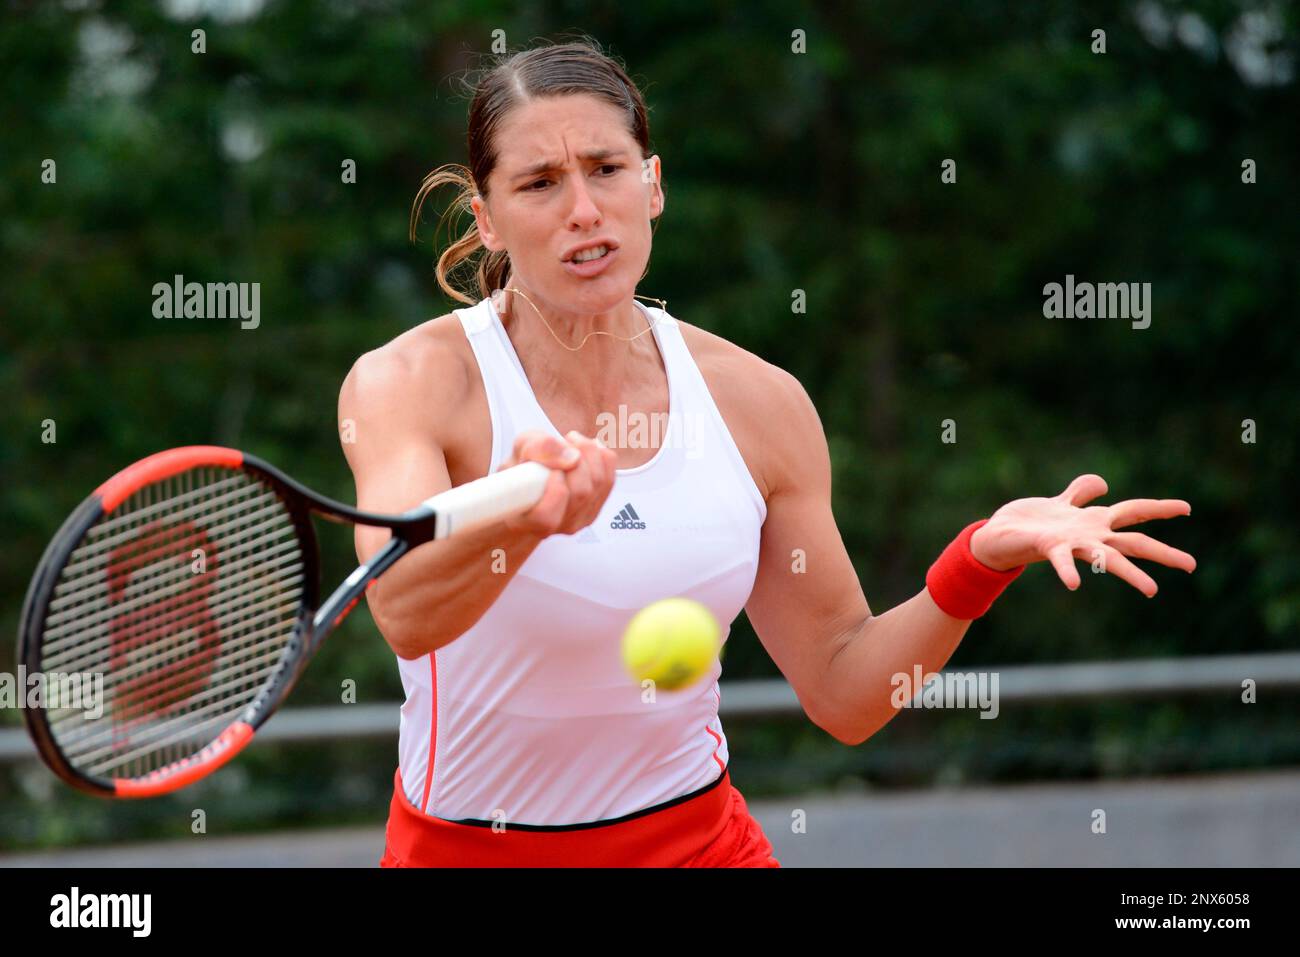 May 16, 2018 - Trnava, Slovakia - ANDREA PETKOVIC of Germany in her second  round match in the Empire Slovak Open tennis tournament in Trnava Slovakia  (Credit Image: © Christopher Levy via